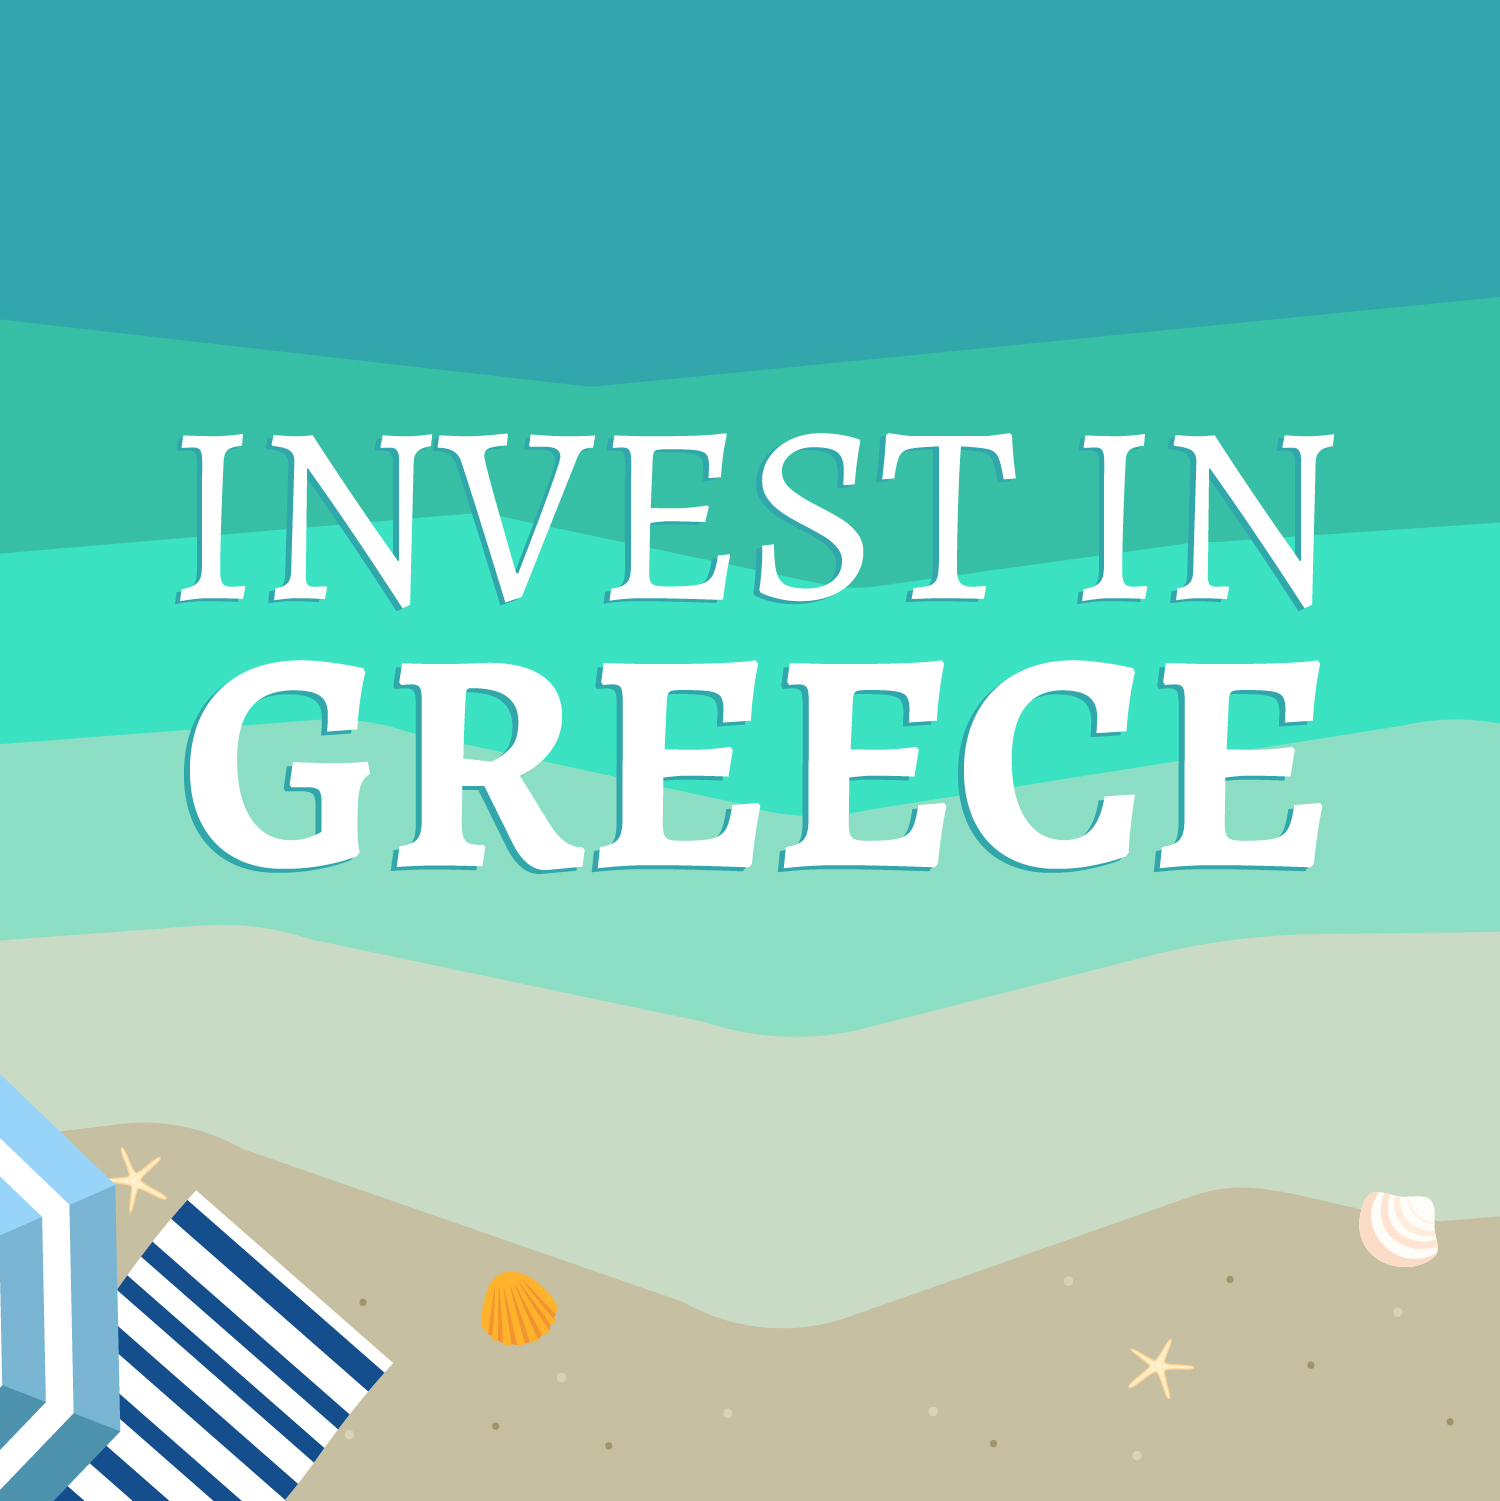 Illustration of a beach with text above that reads "Invest in Greece".